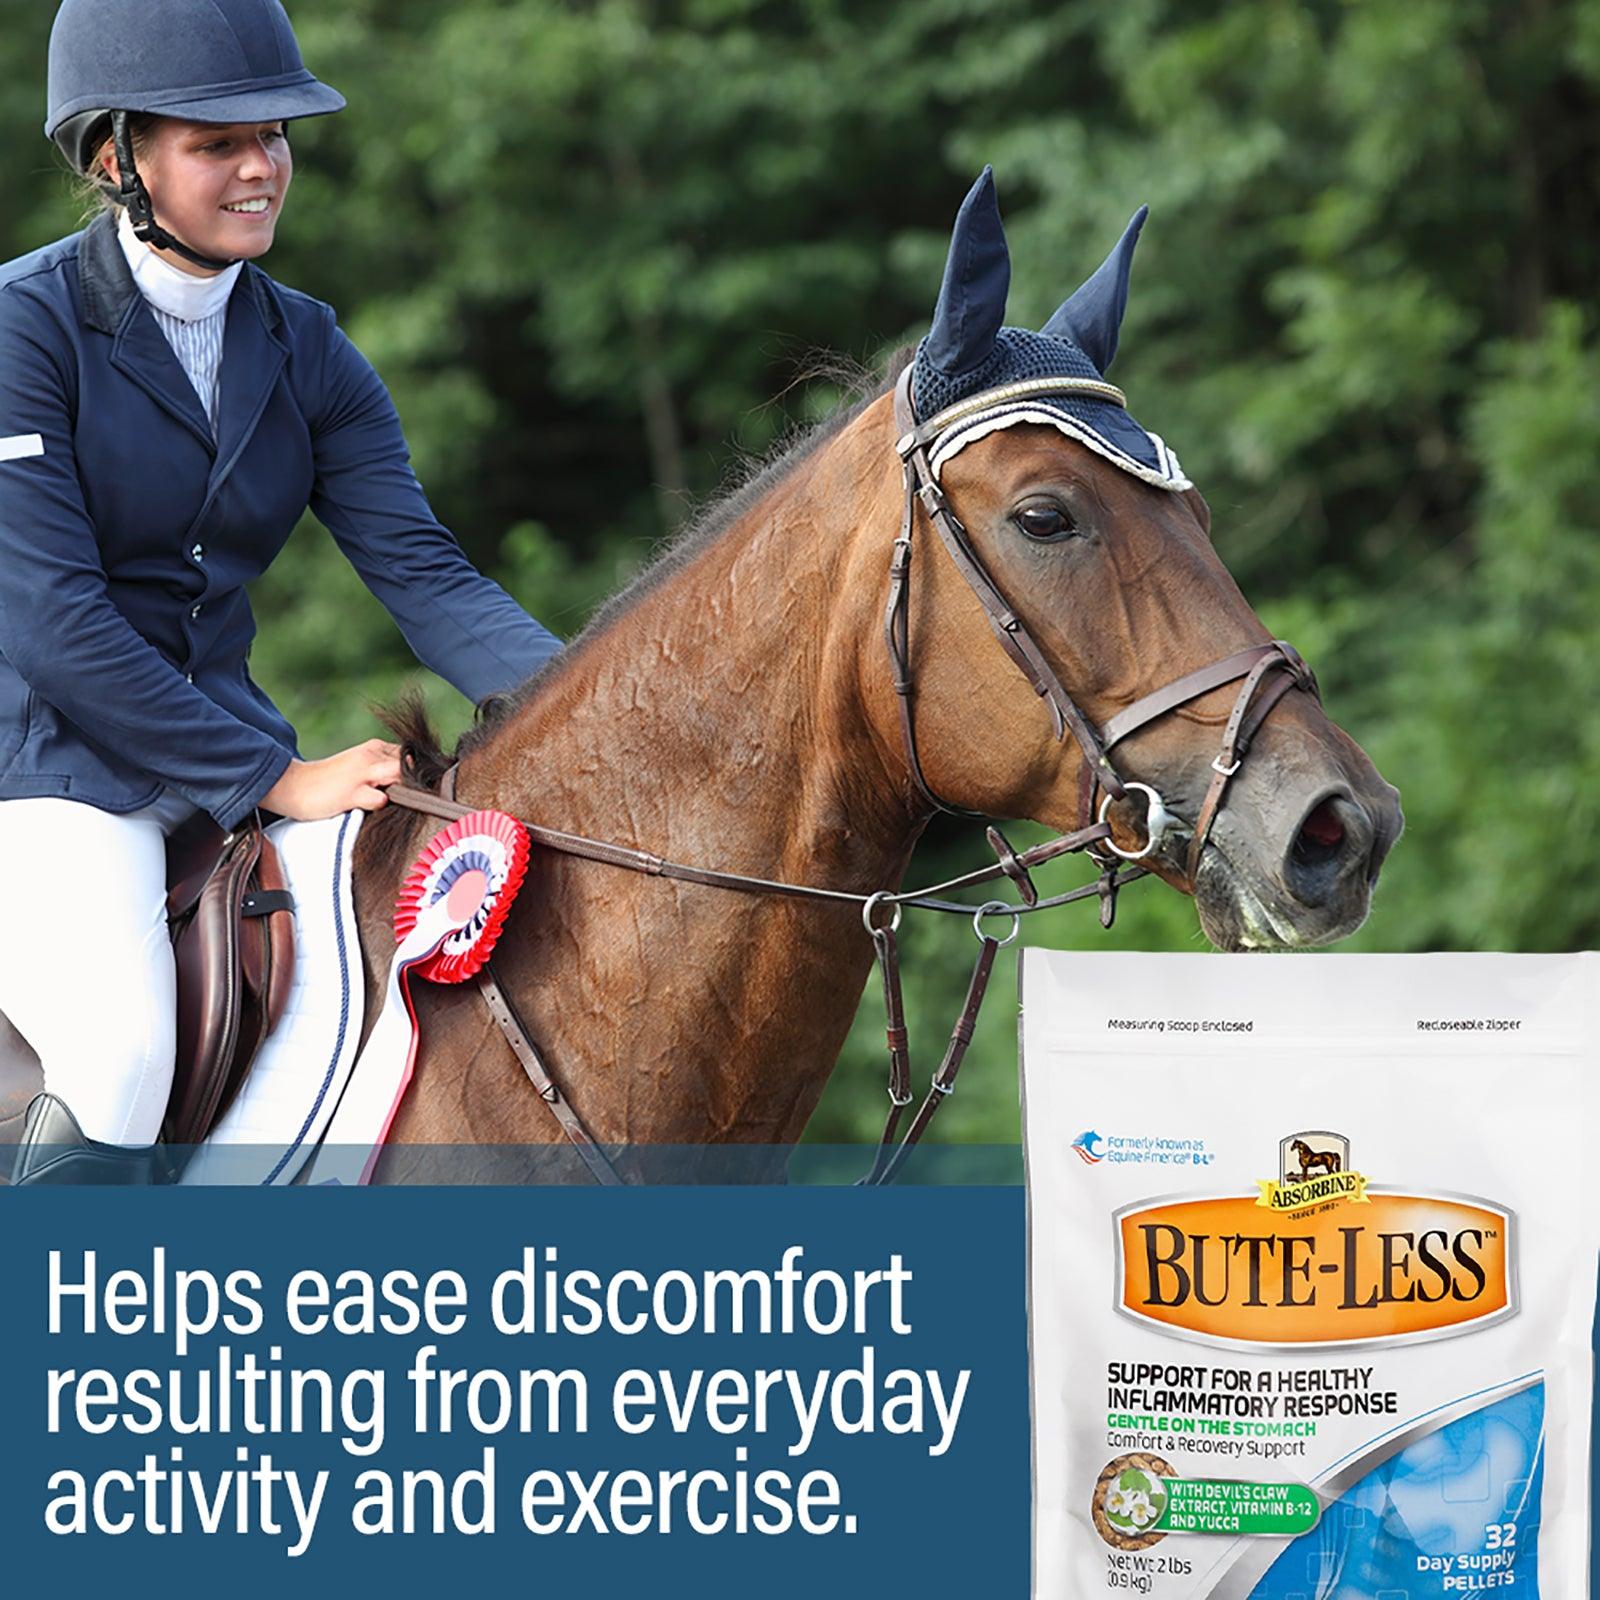 A woman riding a horse with a ribbon on its halter. Bute-less supplement helps ease discomfort resulting from everyday activity and exercise.  